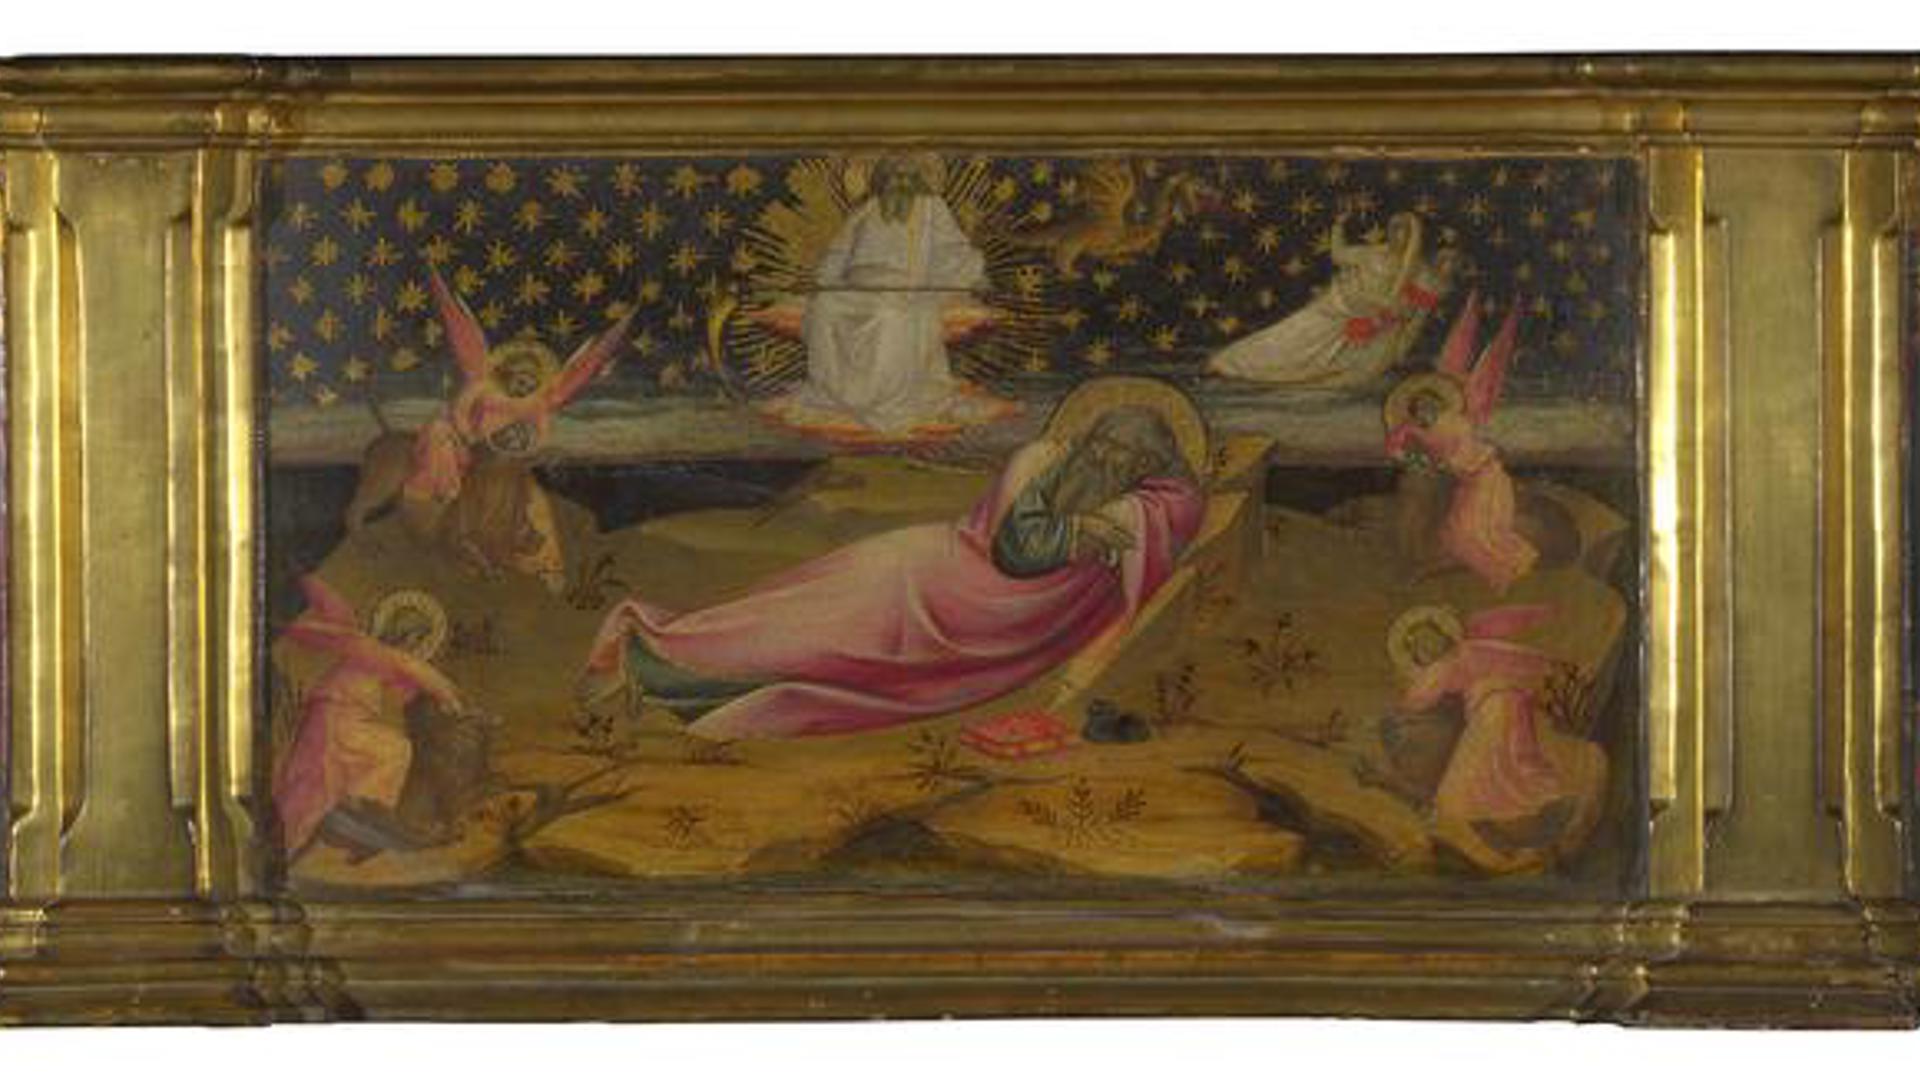 Scenes from the Life of Saint John the Evangelist by Giovanni dal Ponte